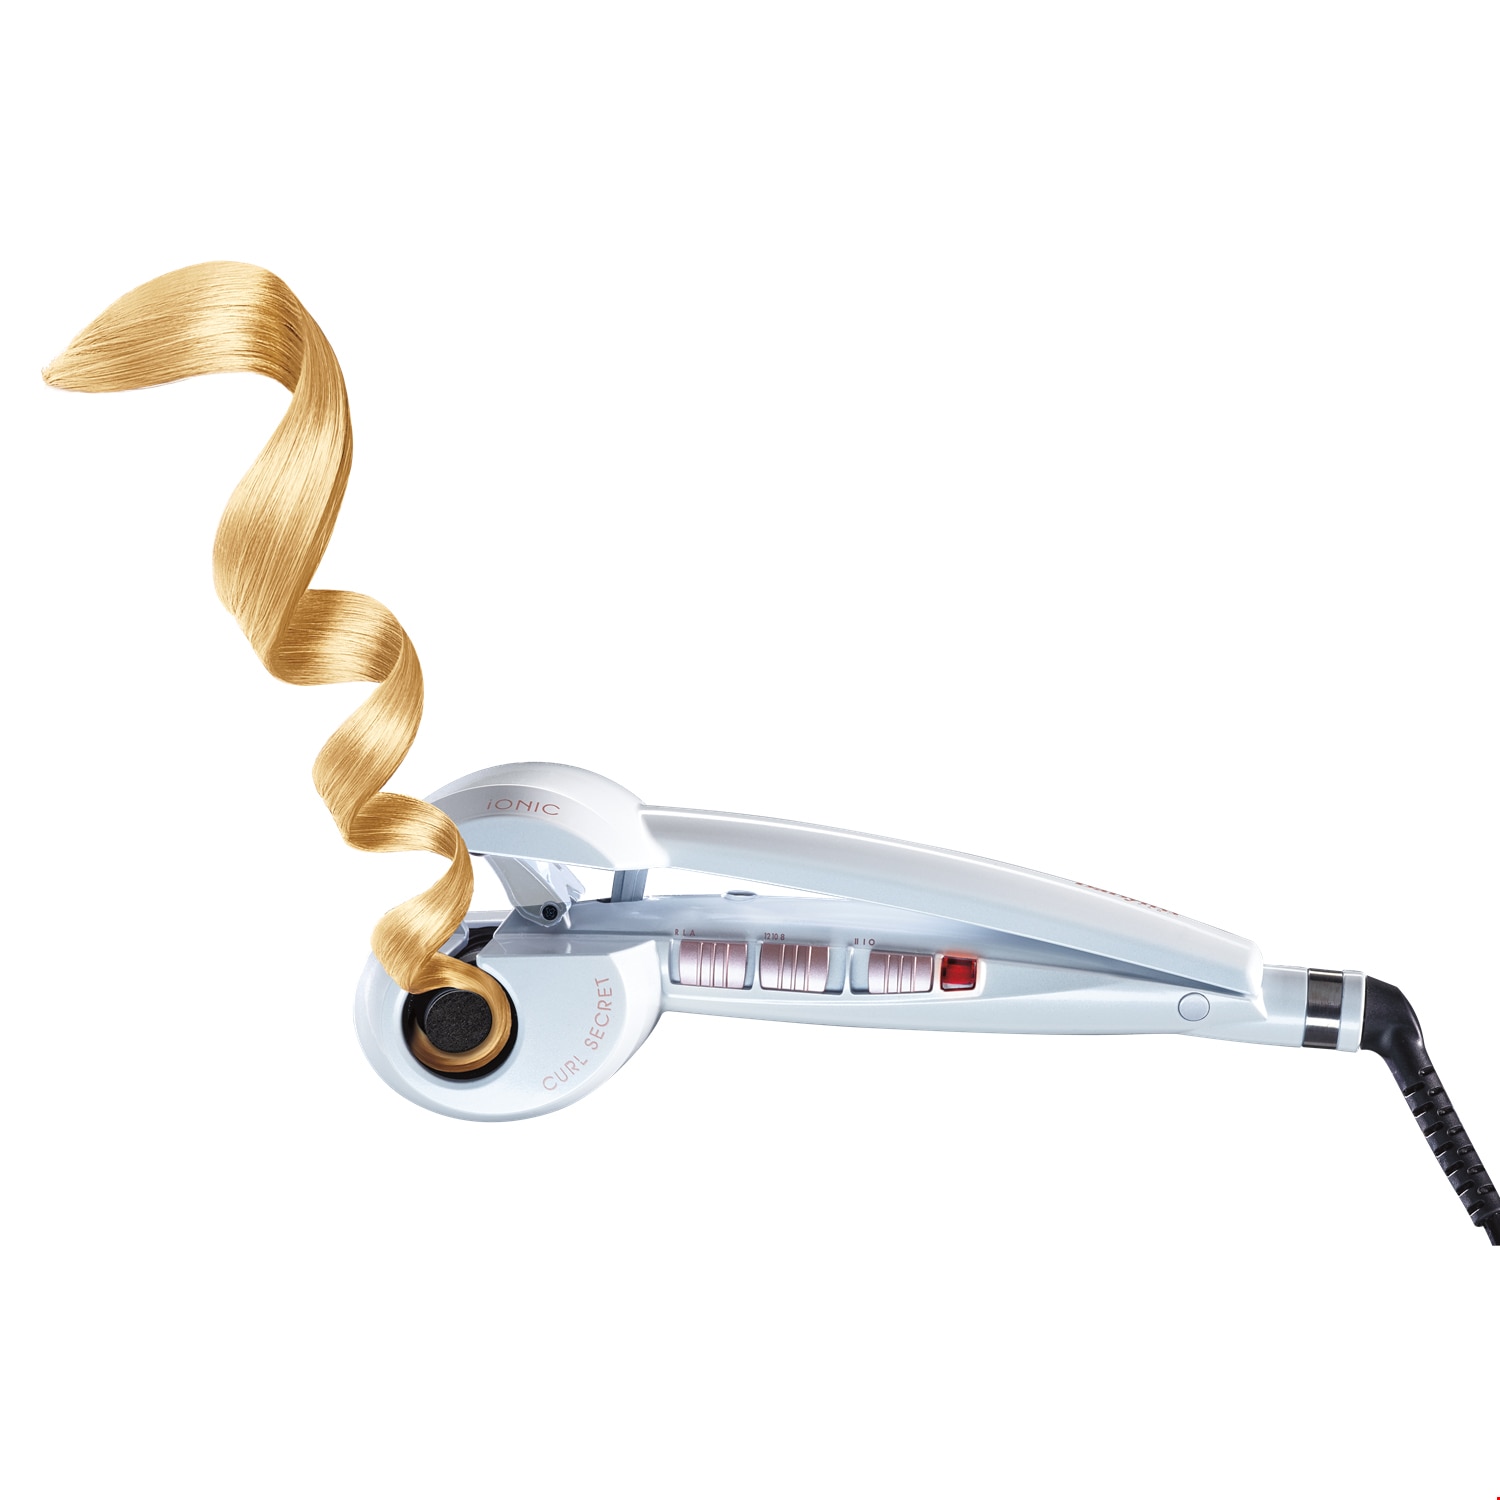 BABYLISS Curl Ionic. BABYLISS c452e. BABYLISS массажер для головы. BABYLISS Pro массажёр для головы. Curl e